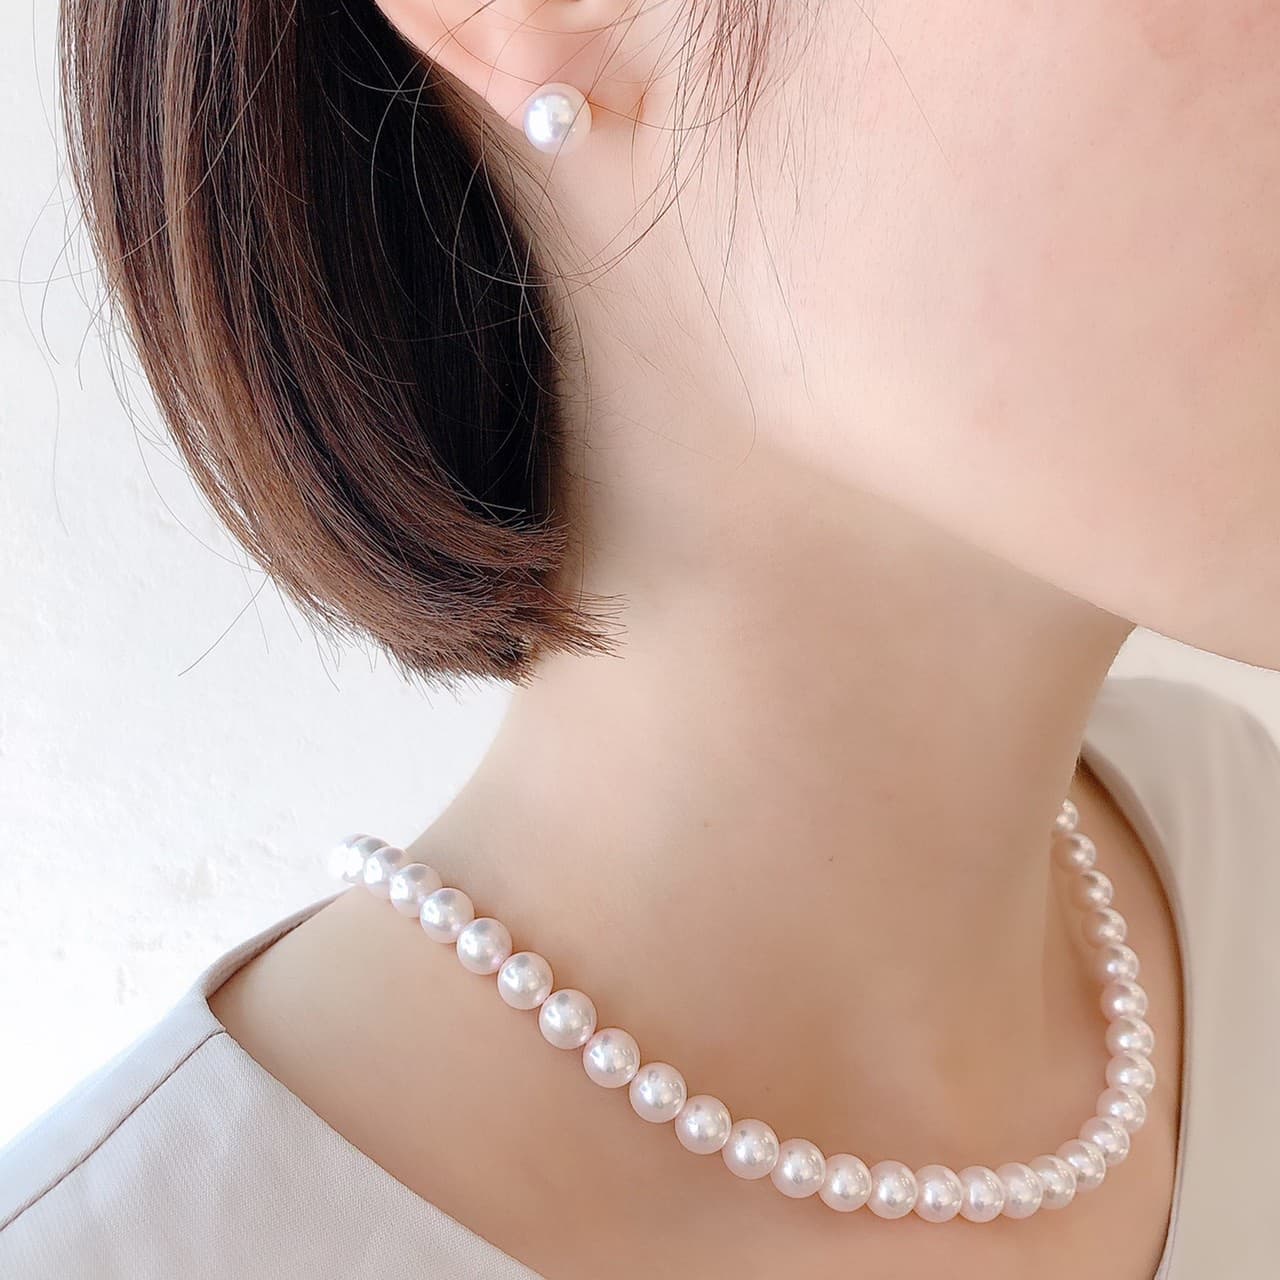 Akoya pearl necklace & pearl earrings set【L】/アコヤ真珠ネックレス＆イヤリングセット Mサイズ-2